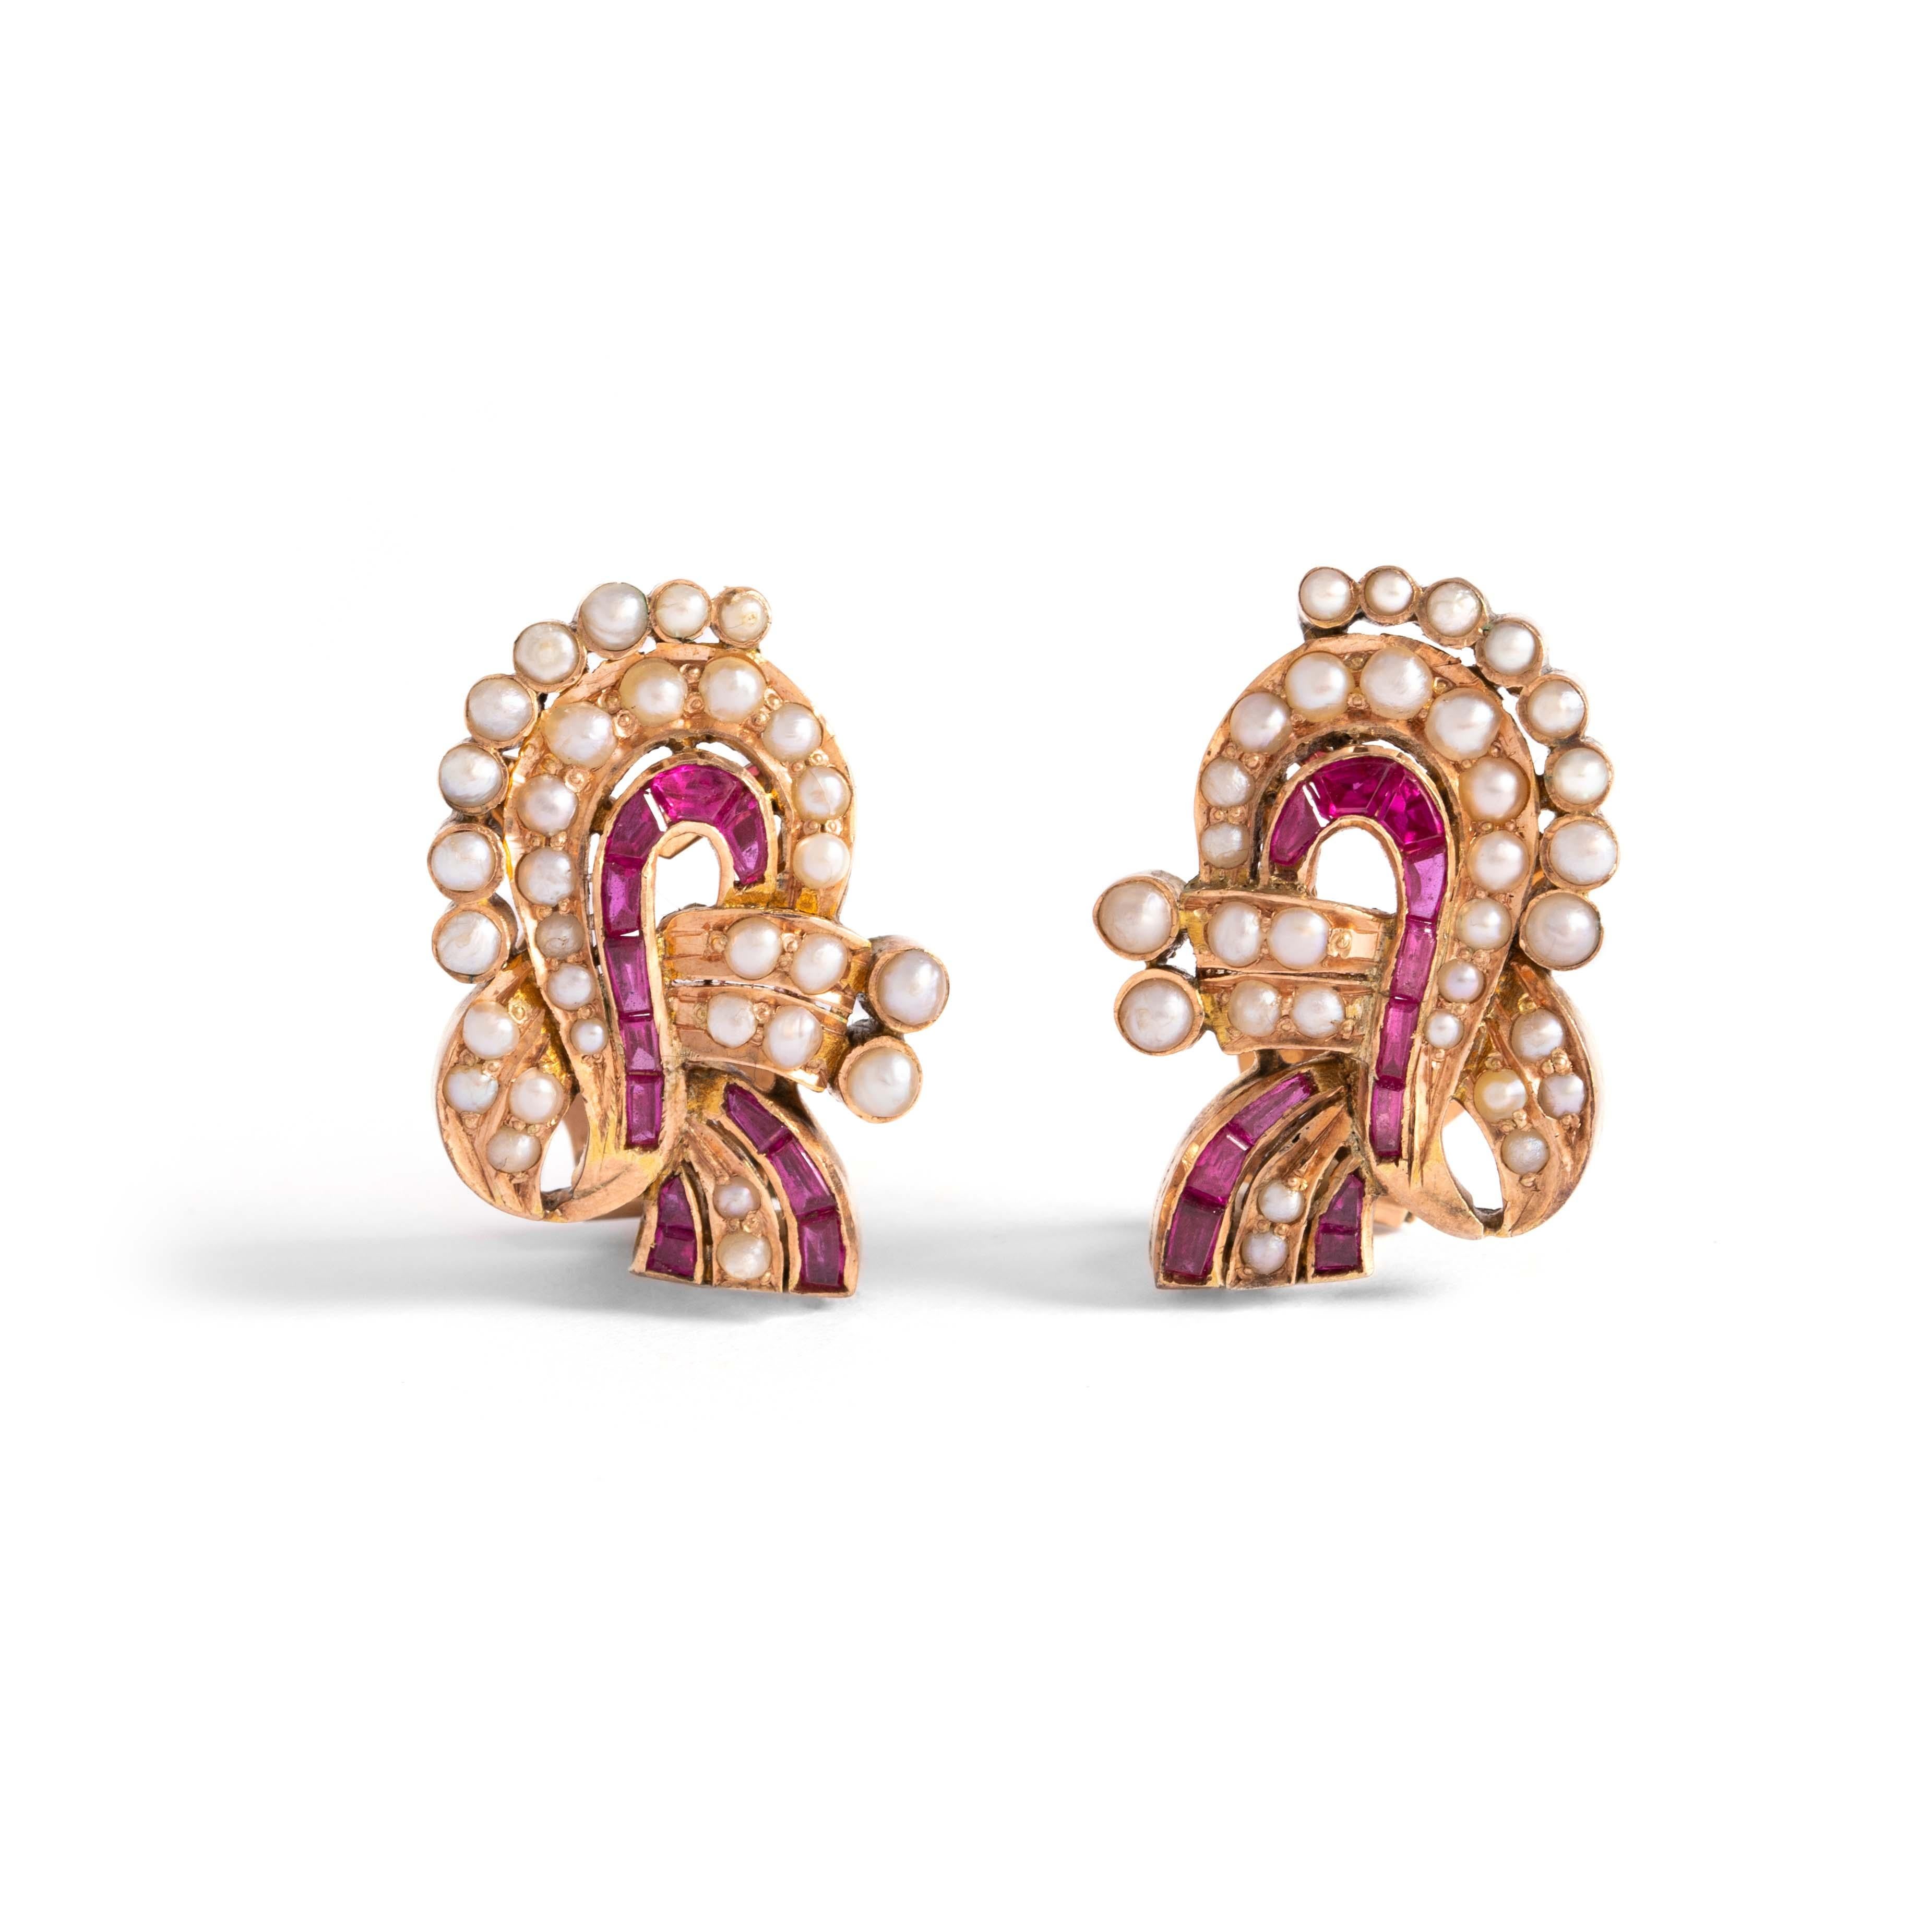 Pair of 14K yellow gold earrings with cultured pearls and calibrated red stones.
Dimensions: 2.70 centimeters x 1.80 centimeters.
Gross weight: 11.79 grams.